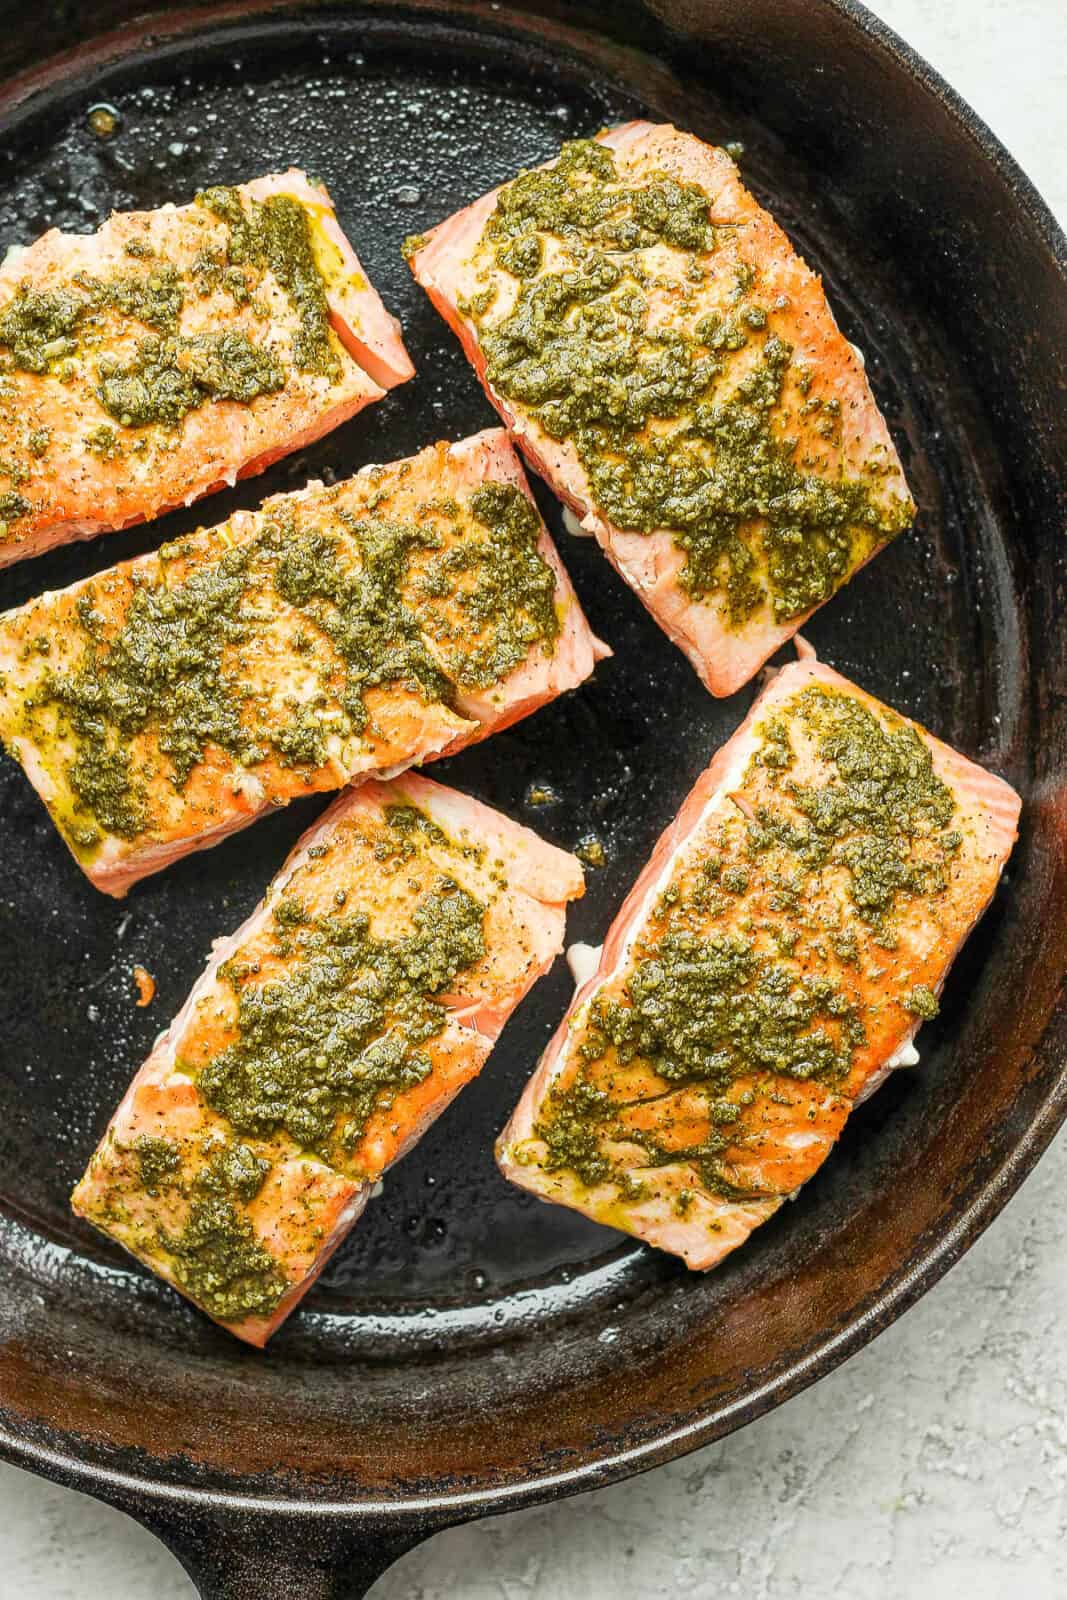 Seared salmon fillets with pesto added on top.